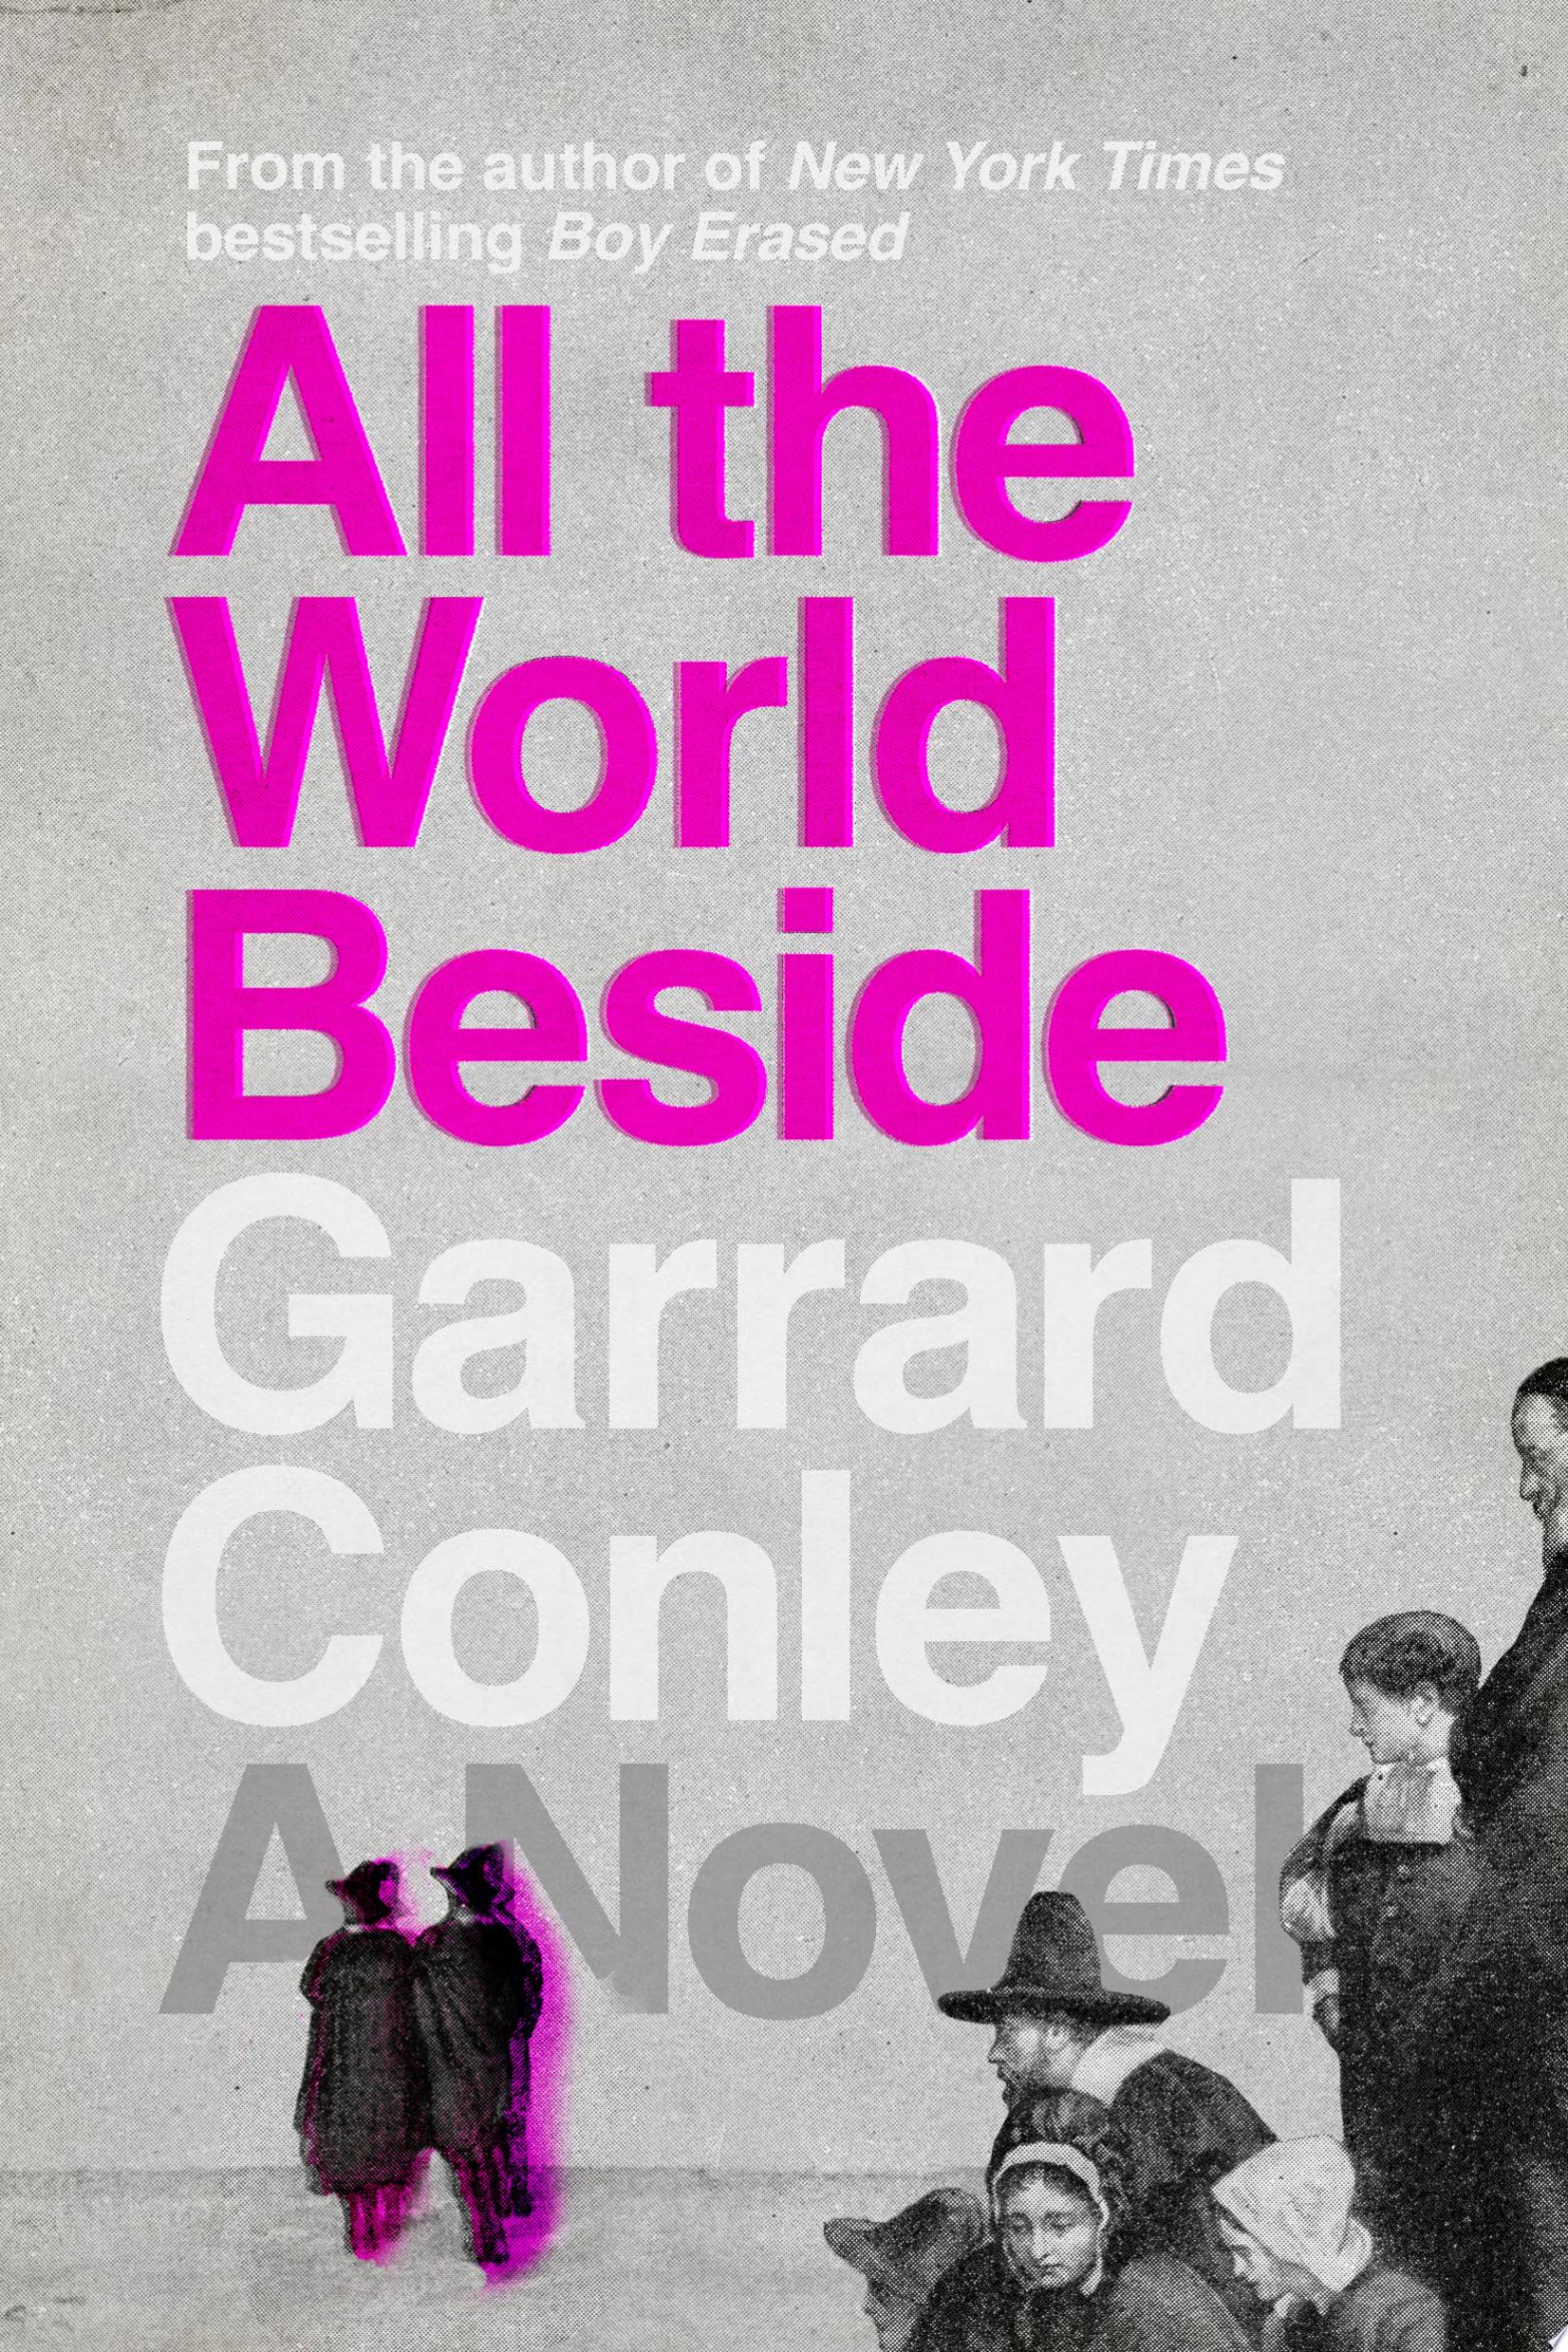 Image for "All the World Beside"